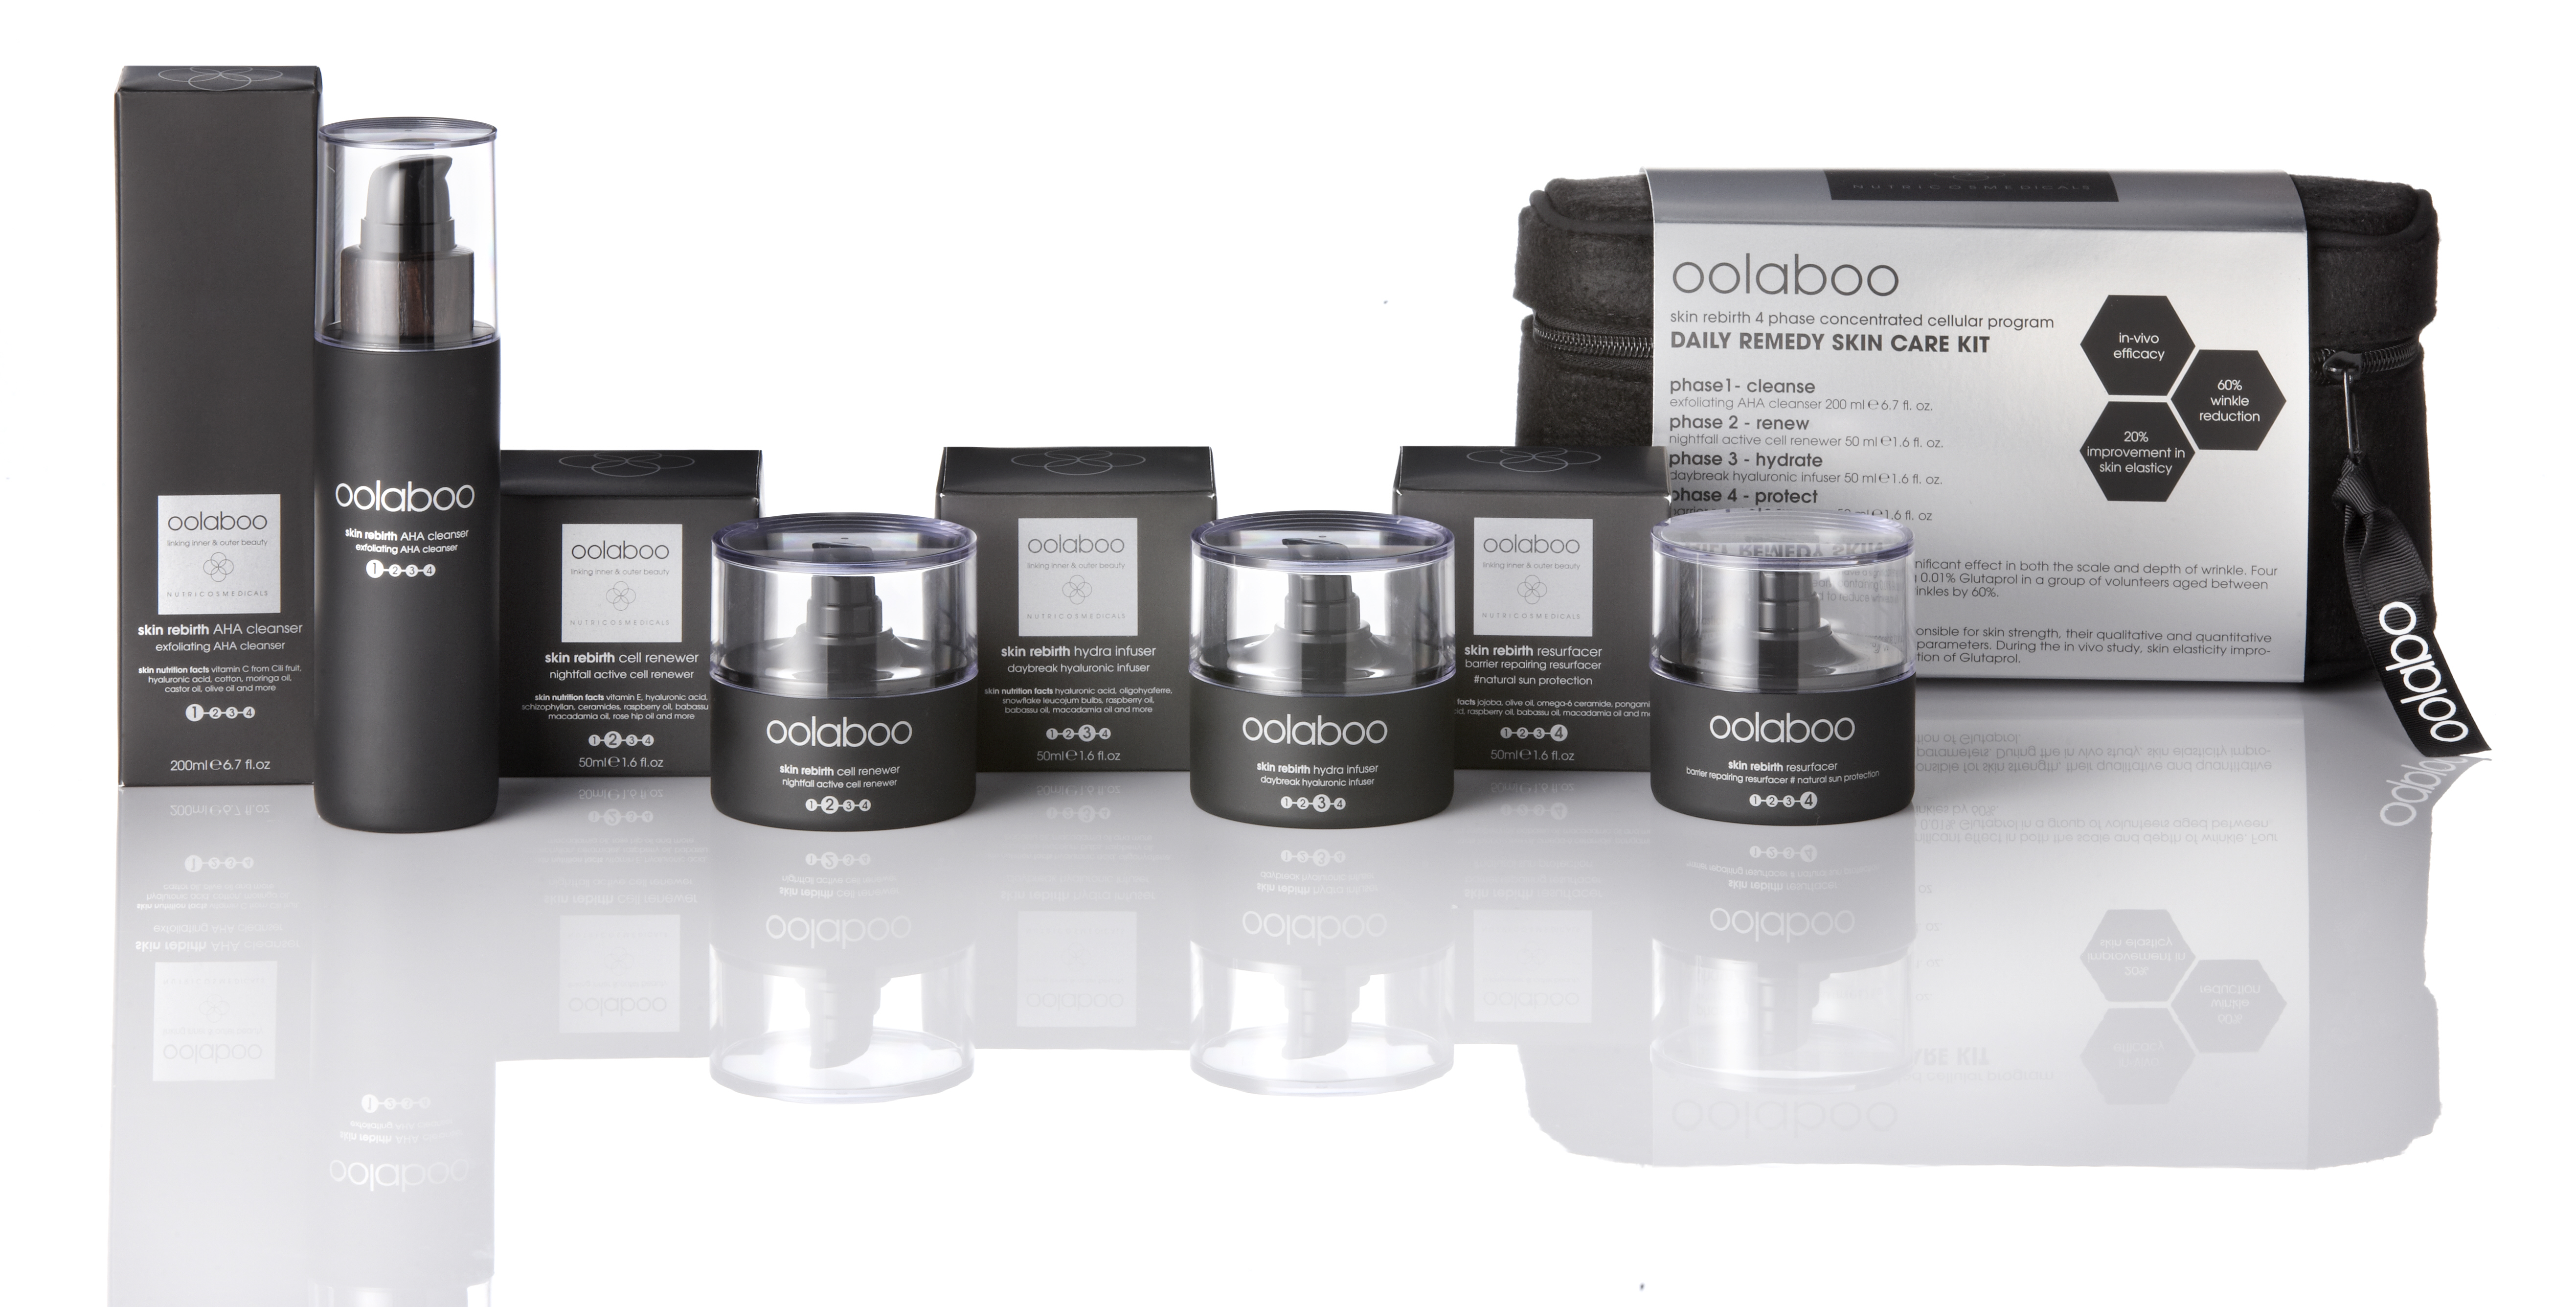 Oolaboo-daily remedy skin care kit wit.jpg